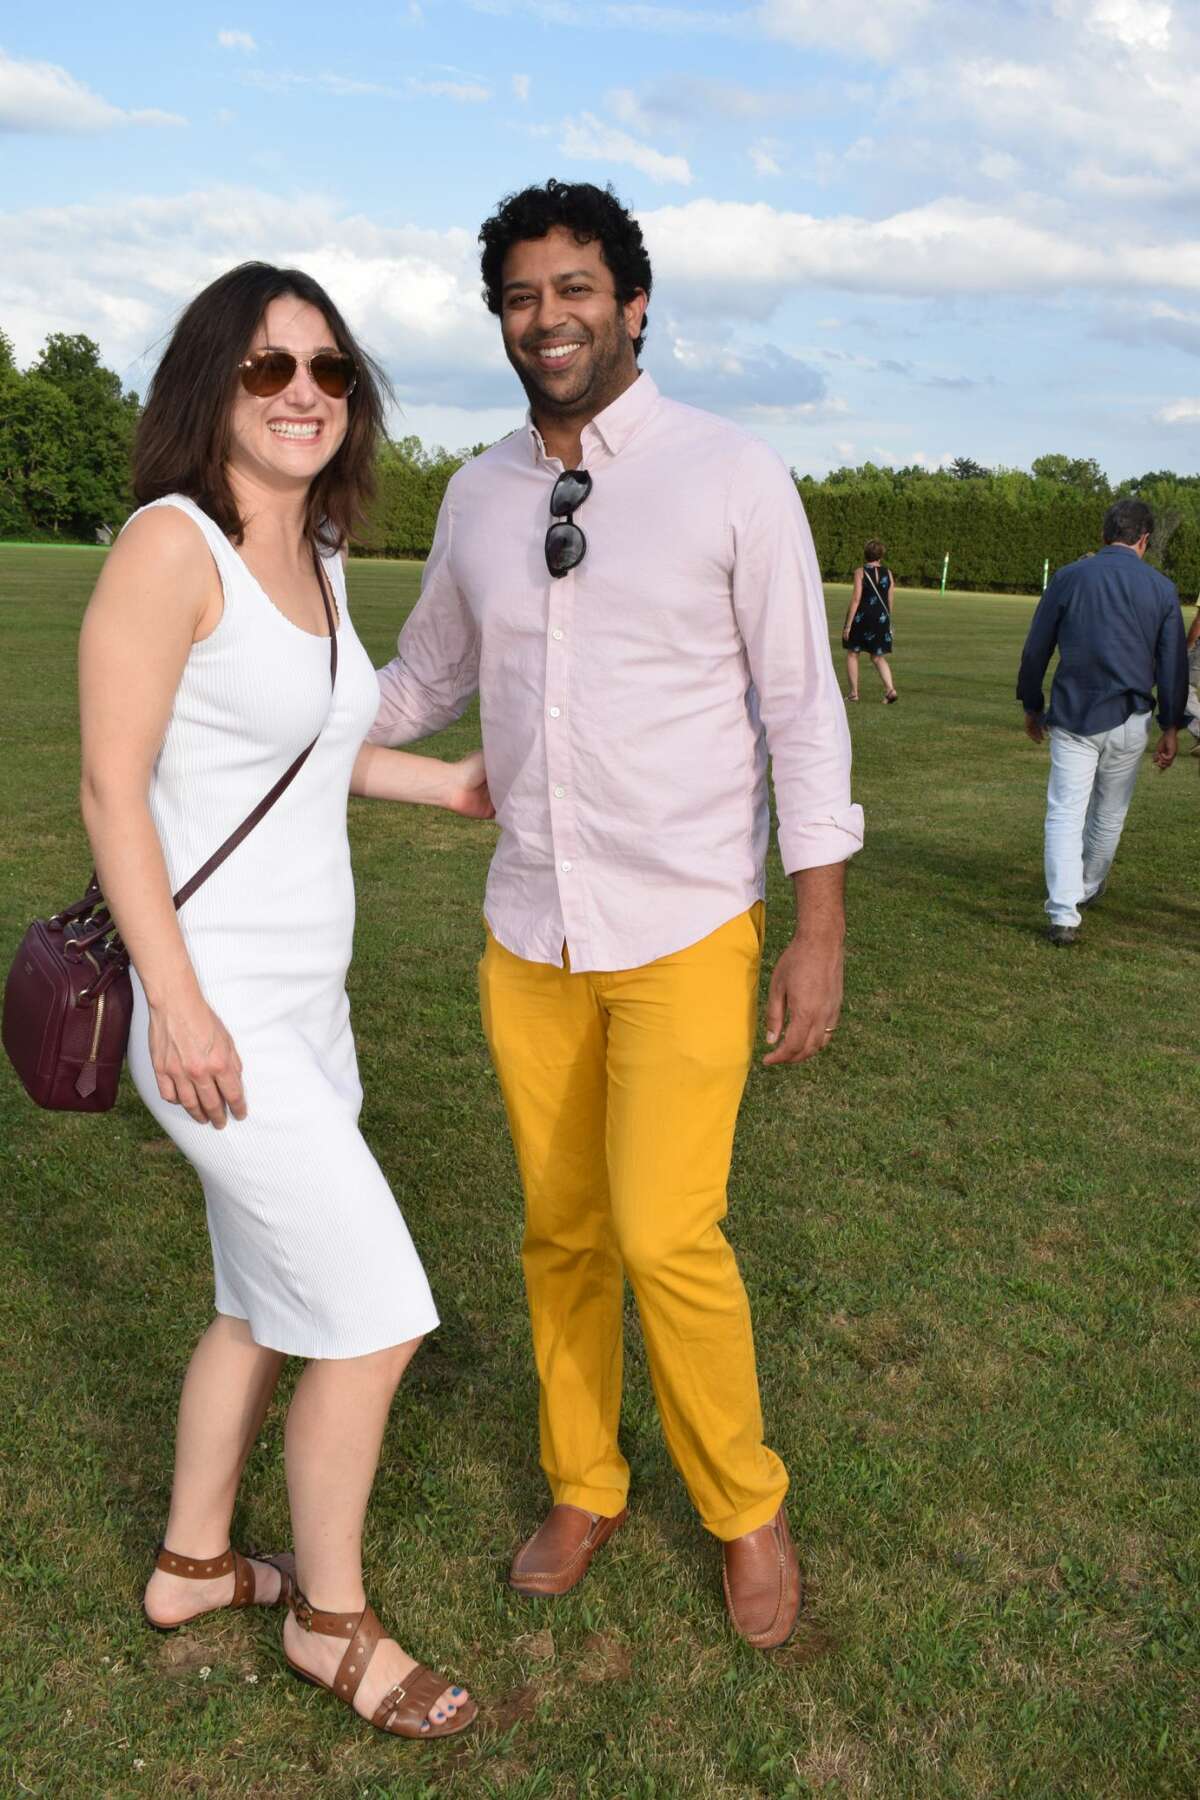 Were you Seen at The Veuve Clicquot Challenge Finals at Saratoga Polo Association on July 22, 2018?